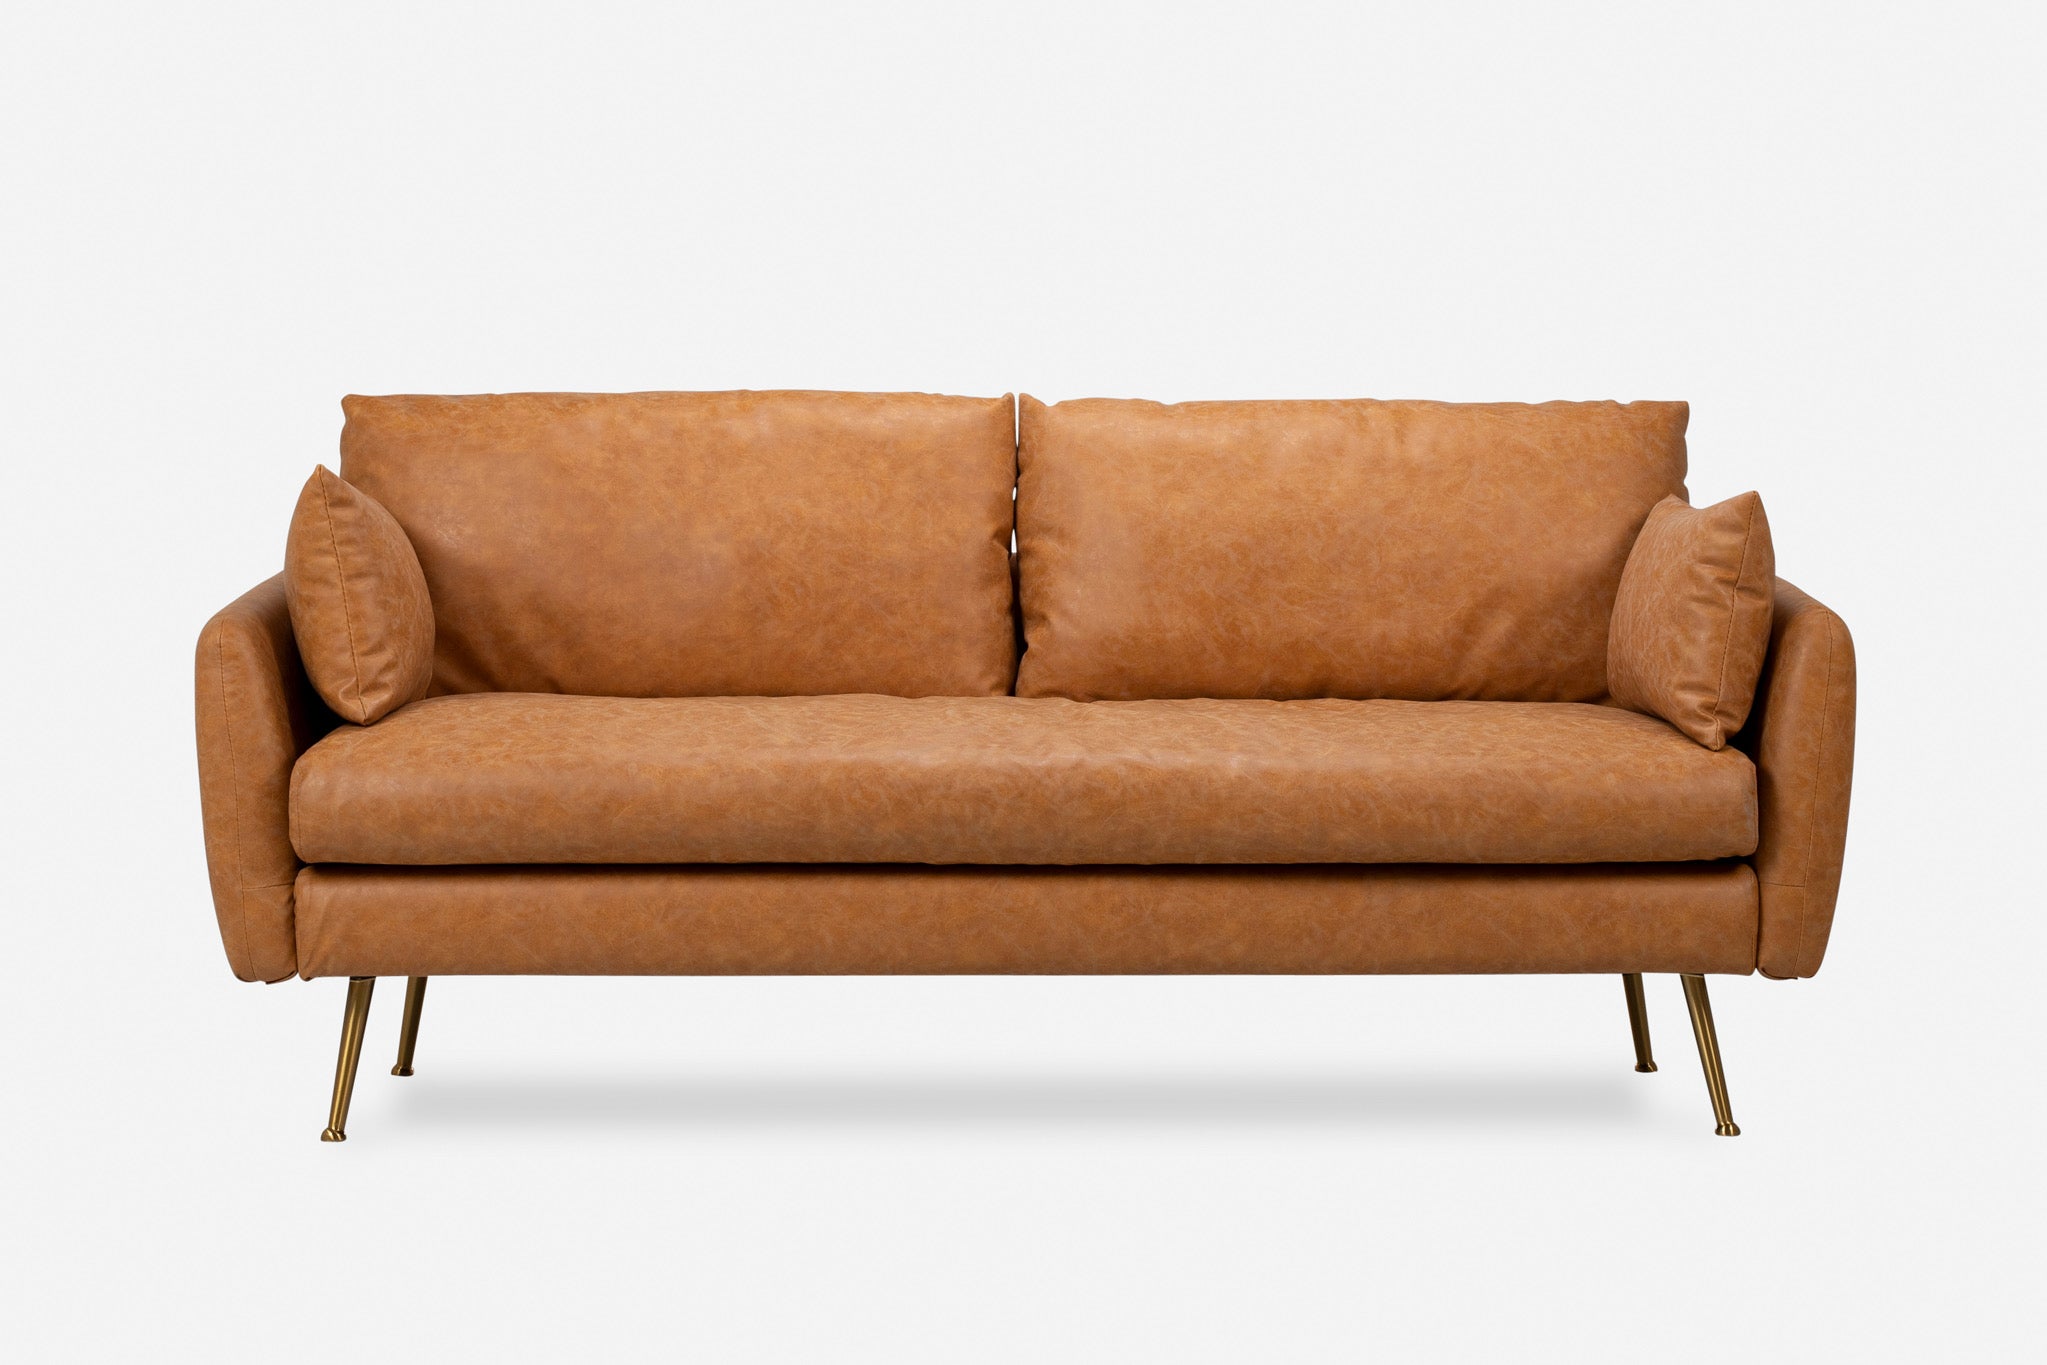 park sofa shown in distressed vegan leather with gold legs